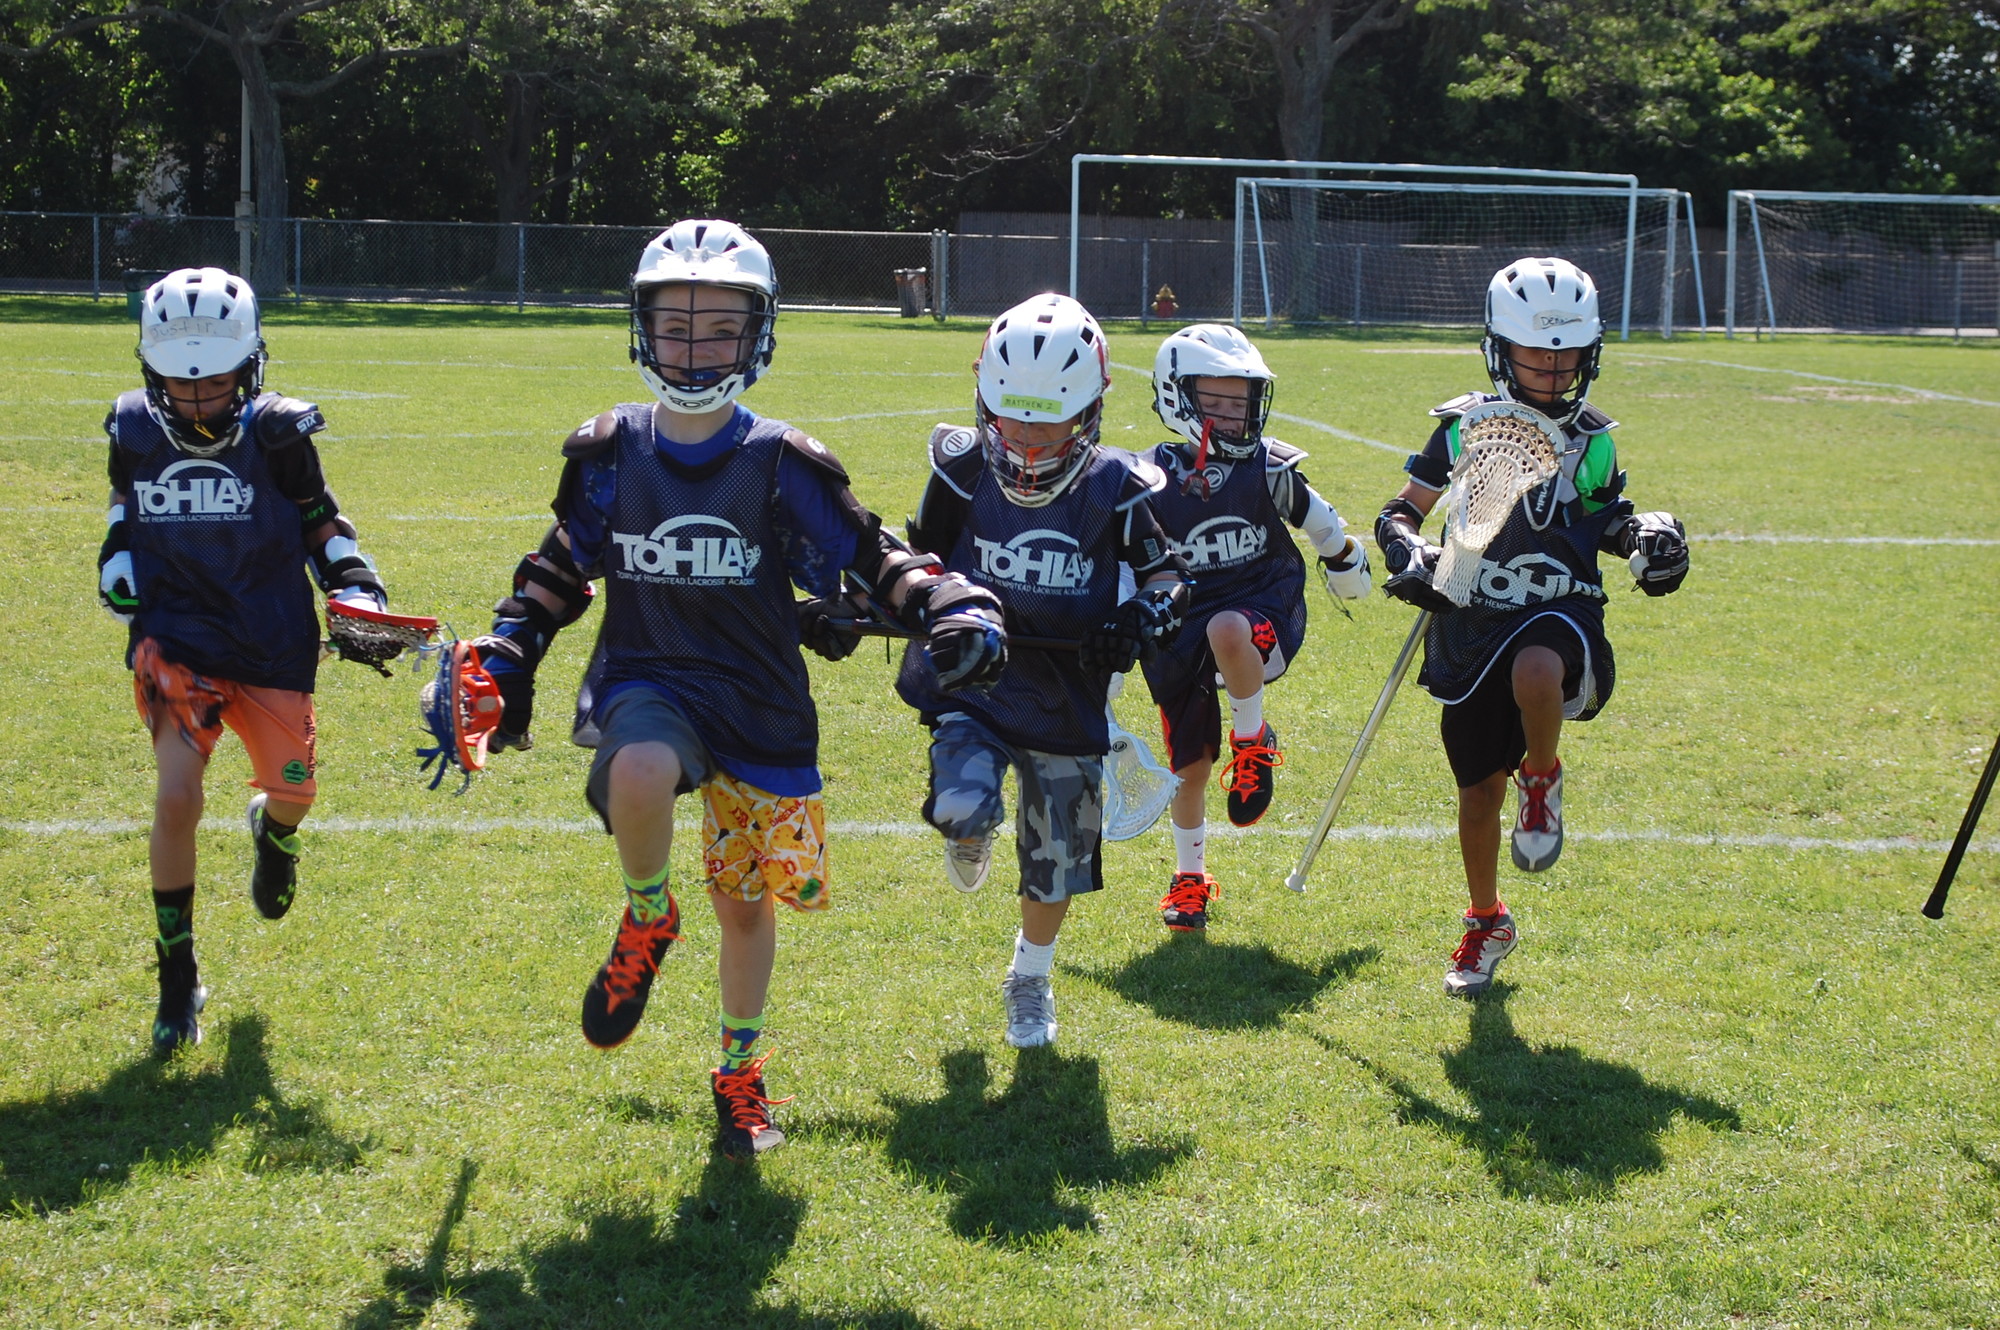 Players participated in various drills at last week's camp in Seaford.